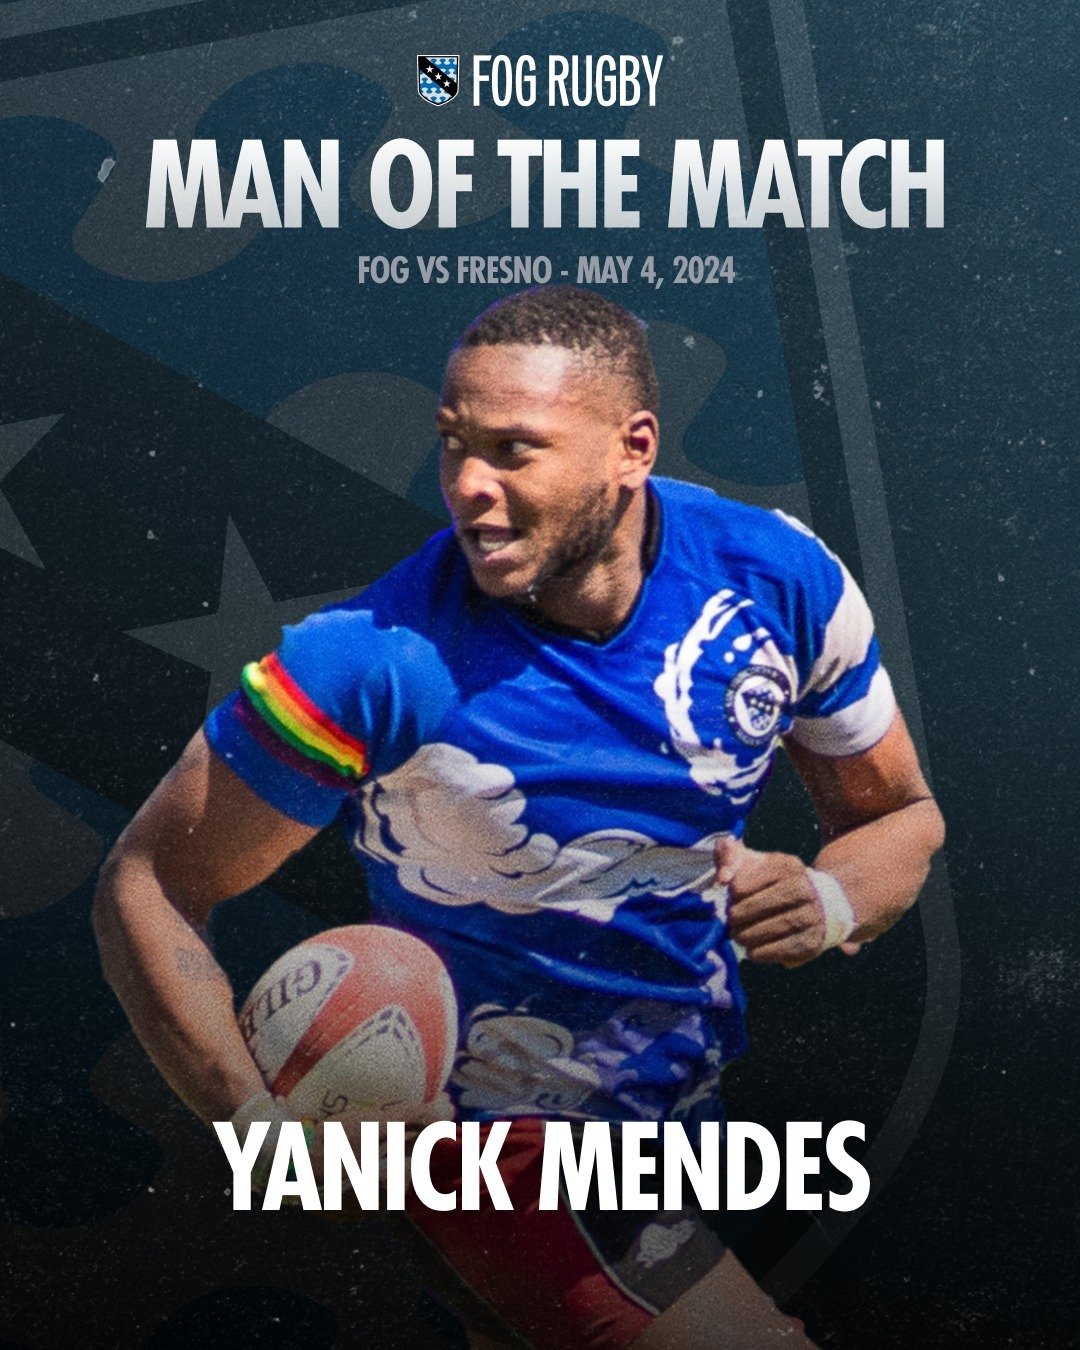 Shoutout to @_yanickvarela, our man of the match last weekend in Fresno! It was a hell of a match, but it ends with a loss. Congrats to Fresno as they head up against Marin for the NCRFU D3 Tom Casey Cup Final! And we'll see everyone in Rome for Bing